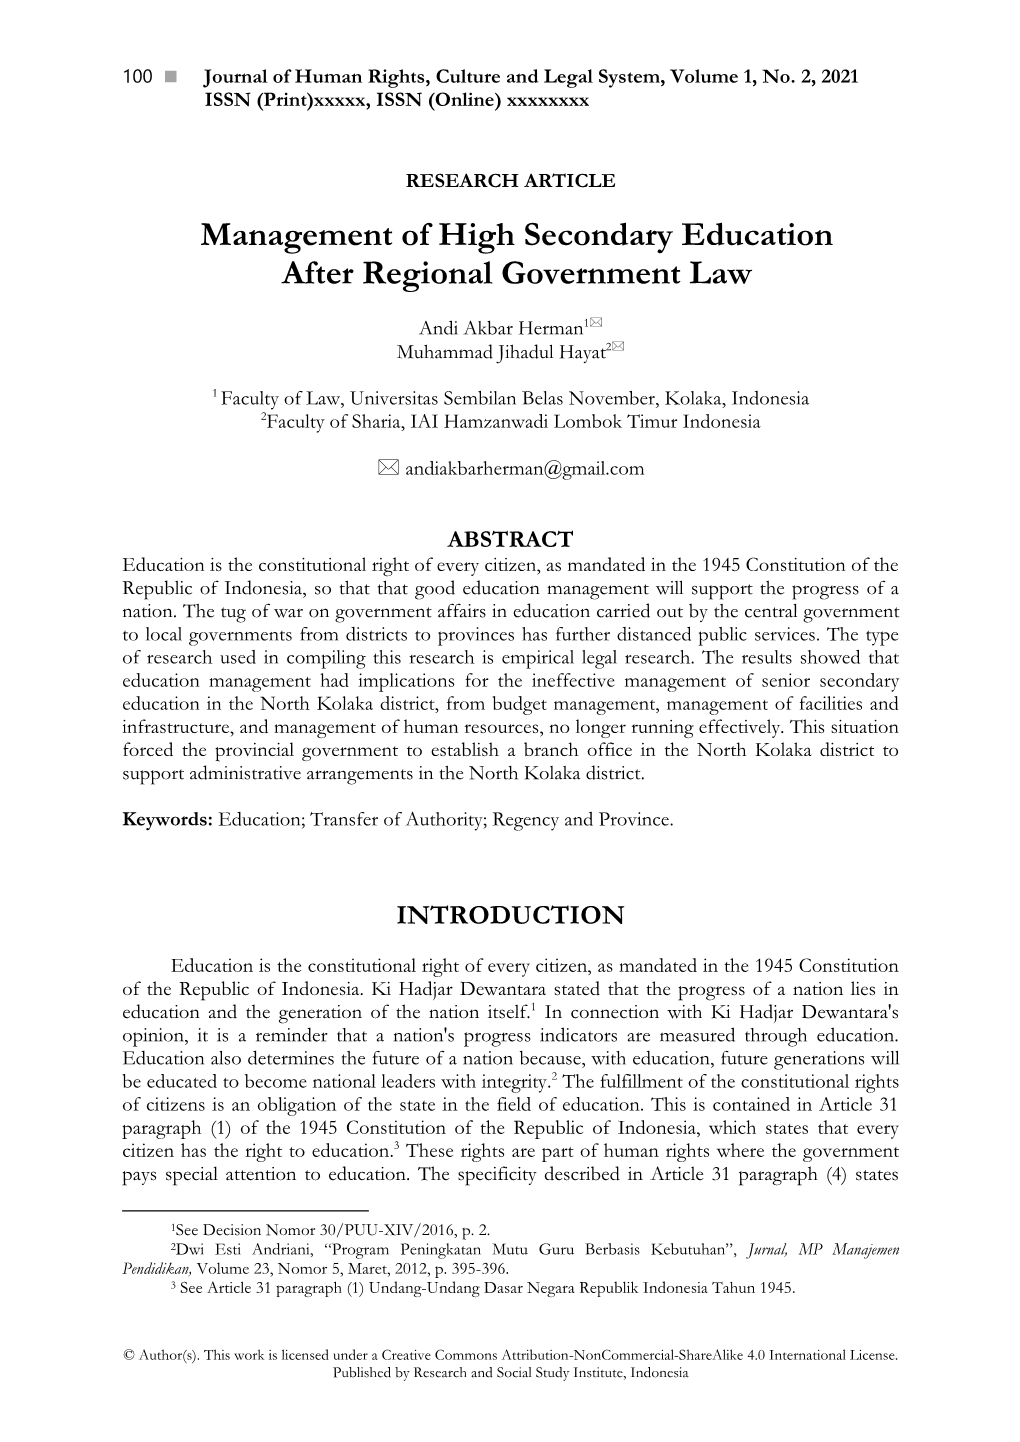 Management of High Secondary Education After Regional Government Law